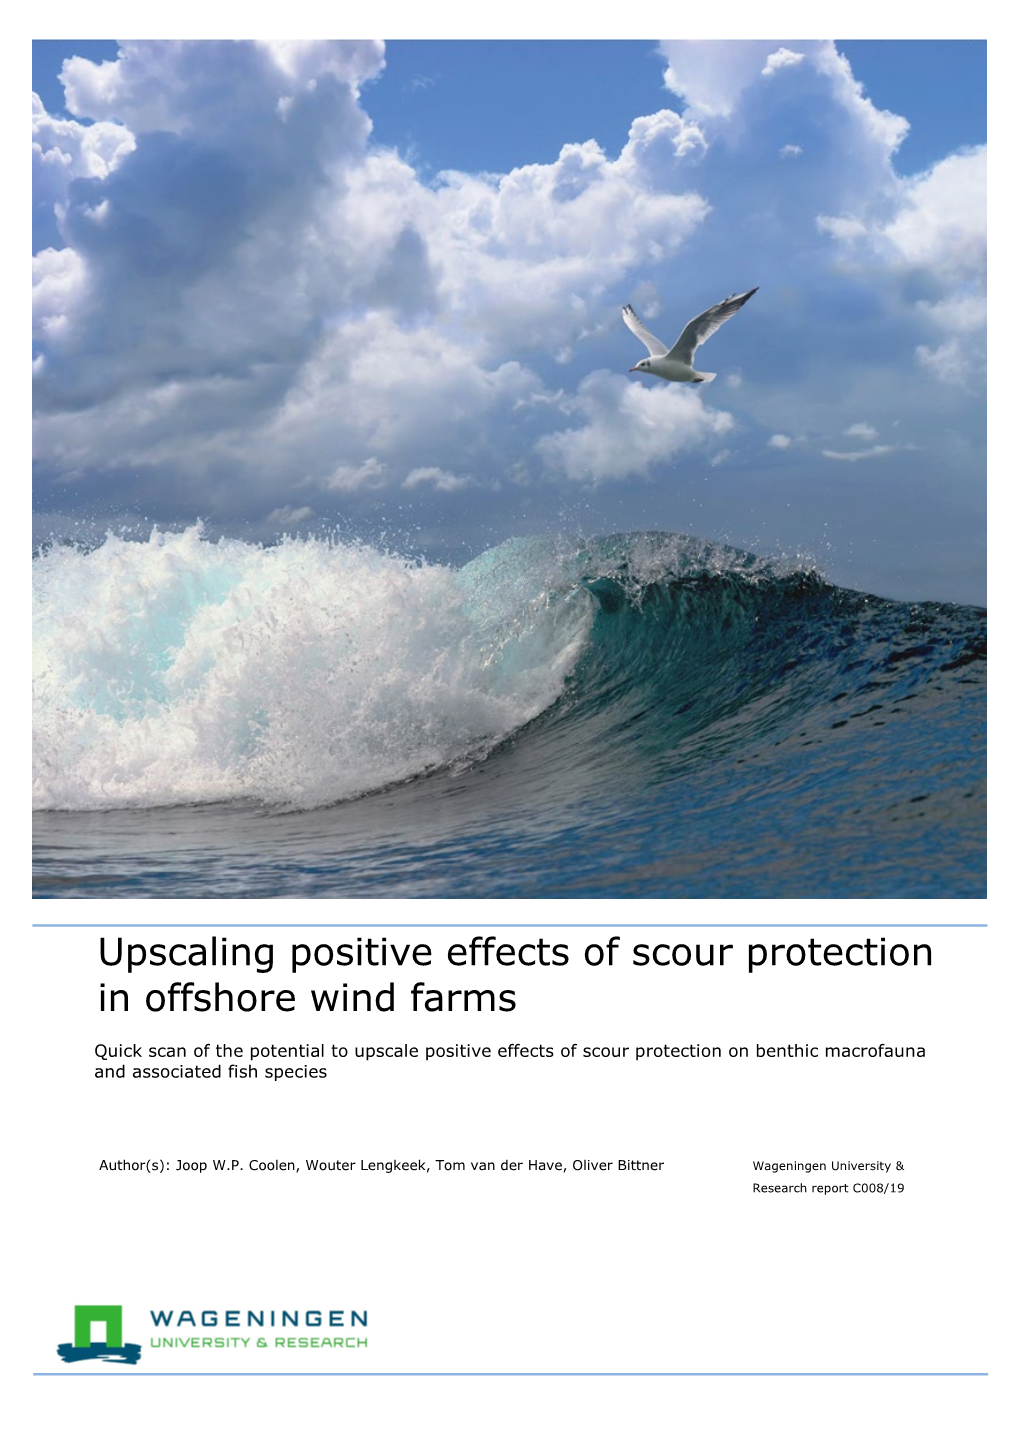 Upscaling Positive Effects of Scour Protection in Offshore Wind Farms